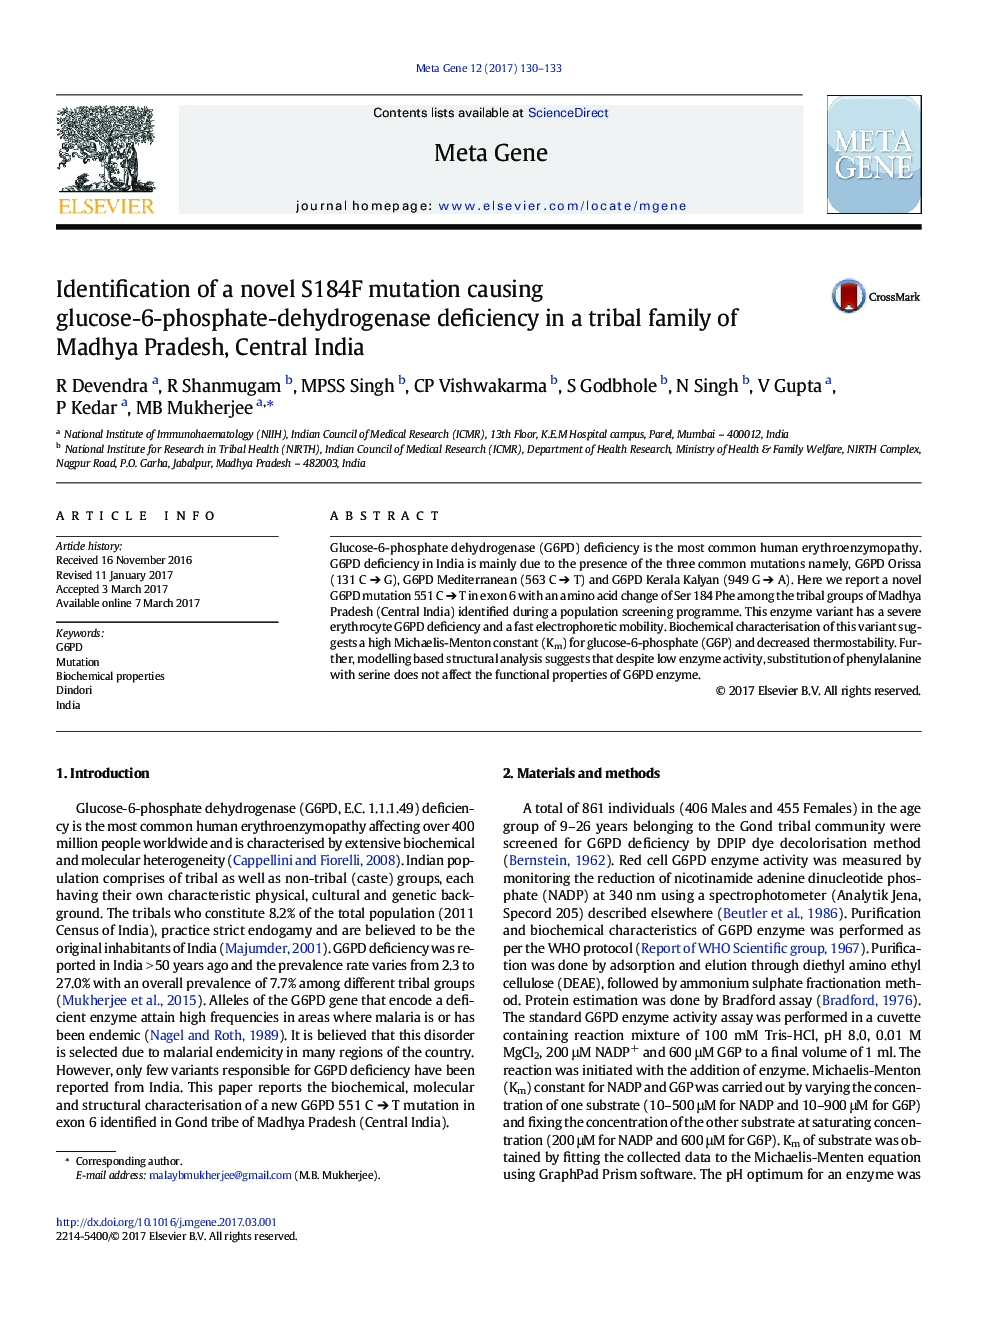 Identification of a novel S184F mutation causing glucose-6-phosphate-dehydrogenase deficiency in a tribal family of Madhya Pradesh, Central India